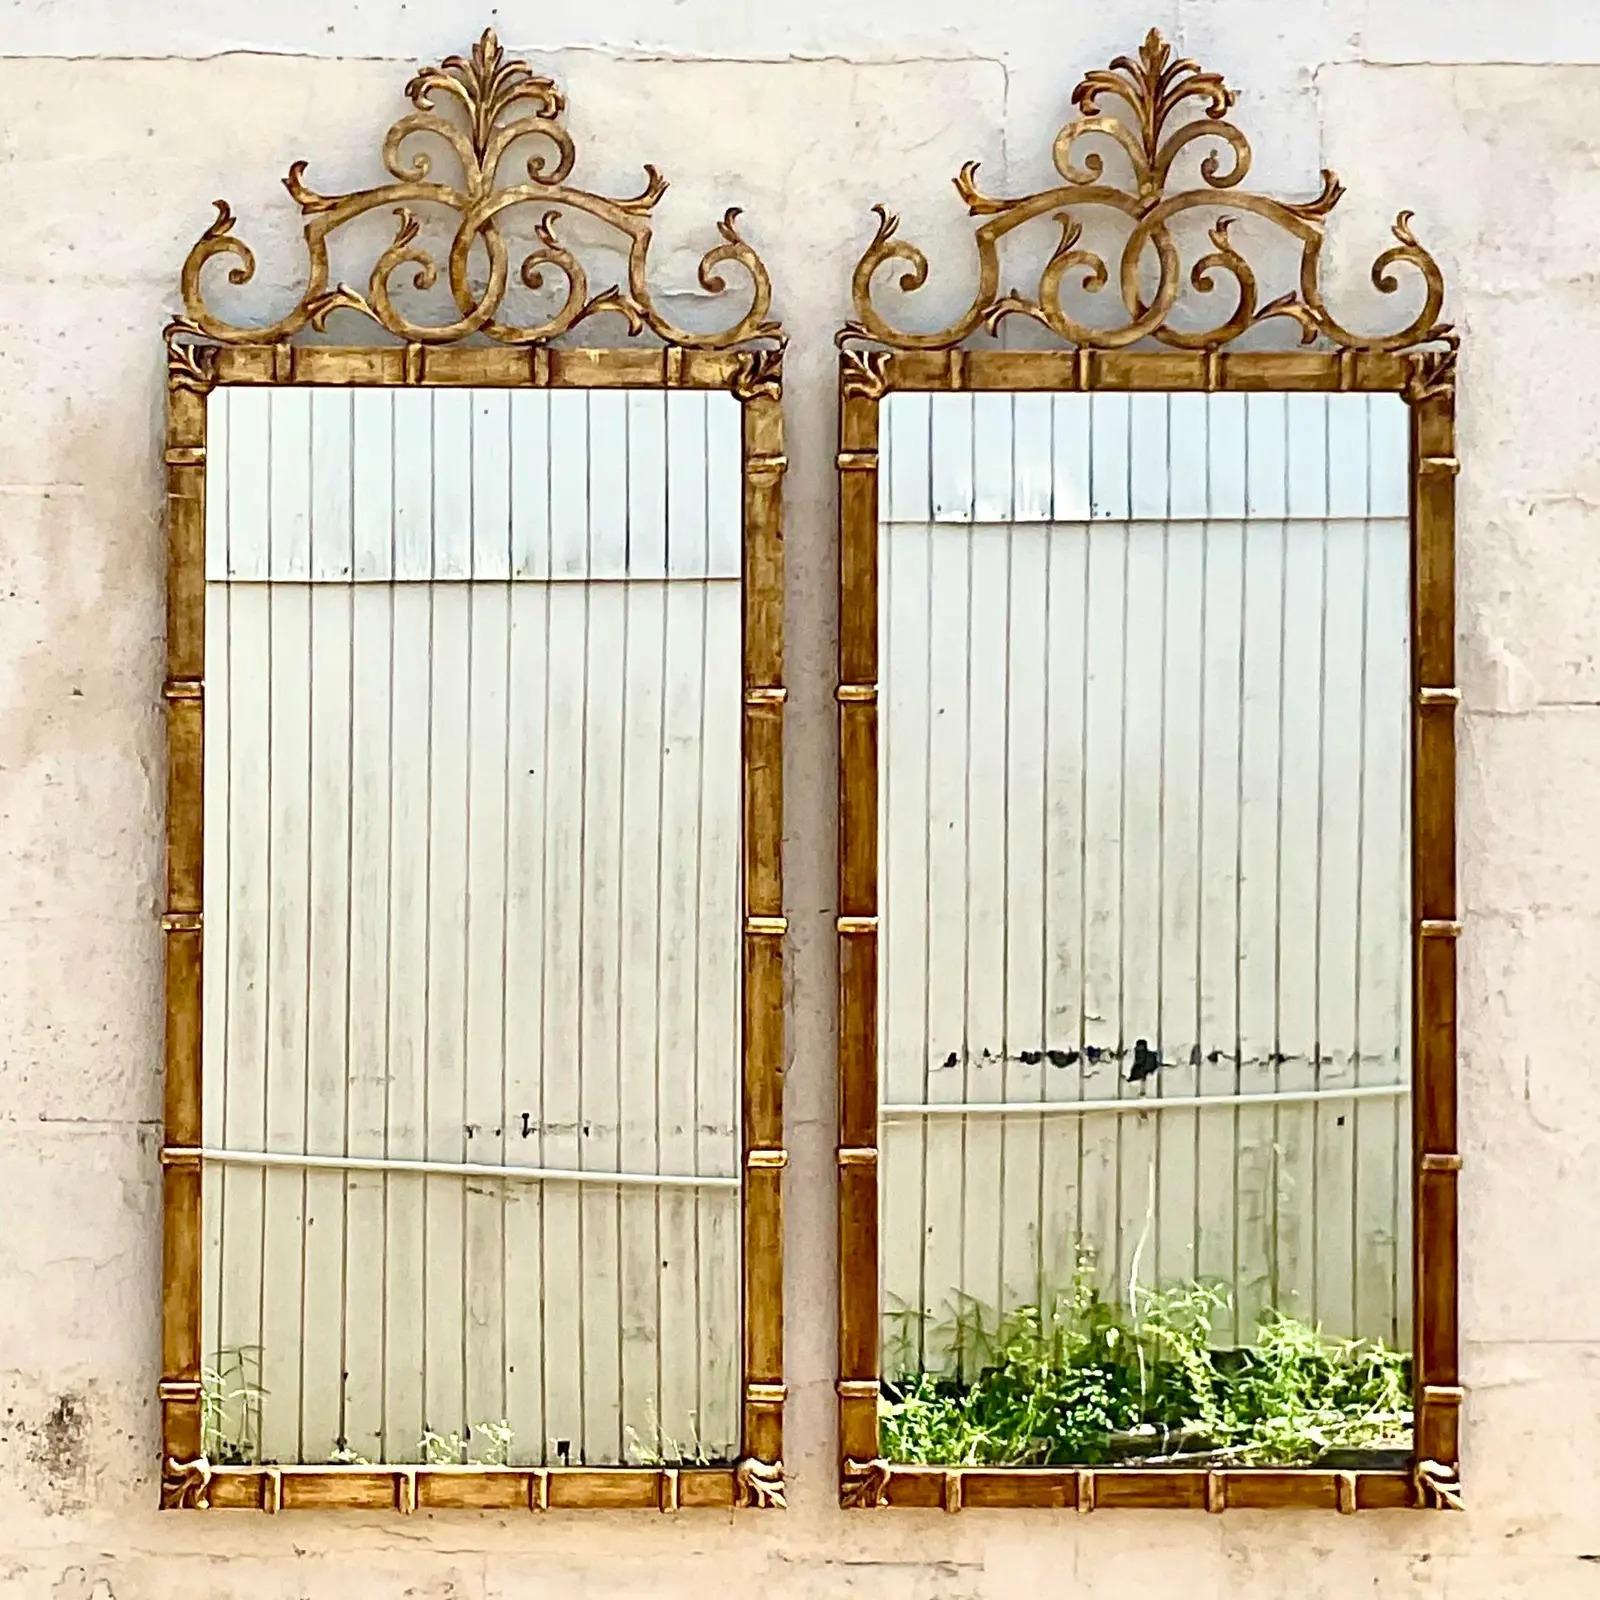 Fantastic vintage Italian Regency wall mirrors. Made by the iconic Palladio group. A chic gilt finish over metal. Acquired from a Palm. Each estate.